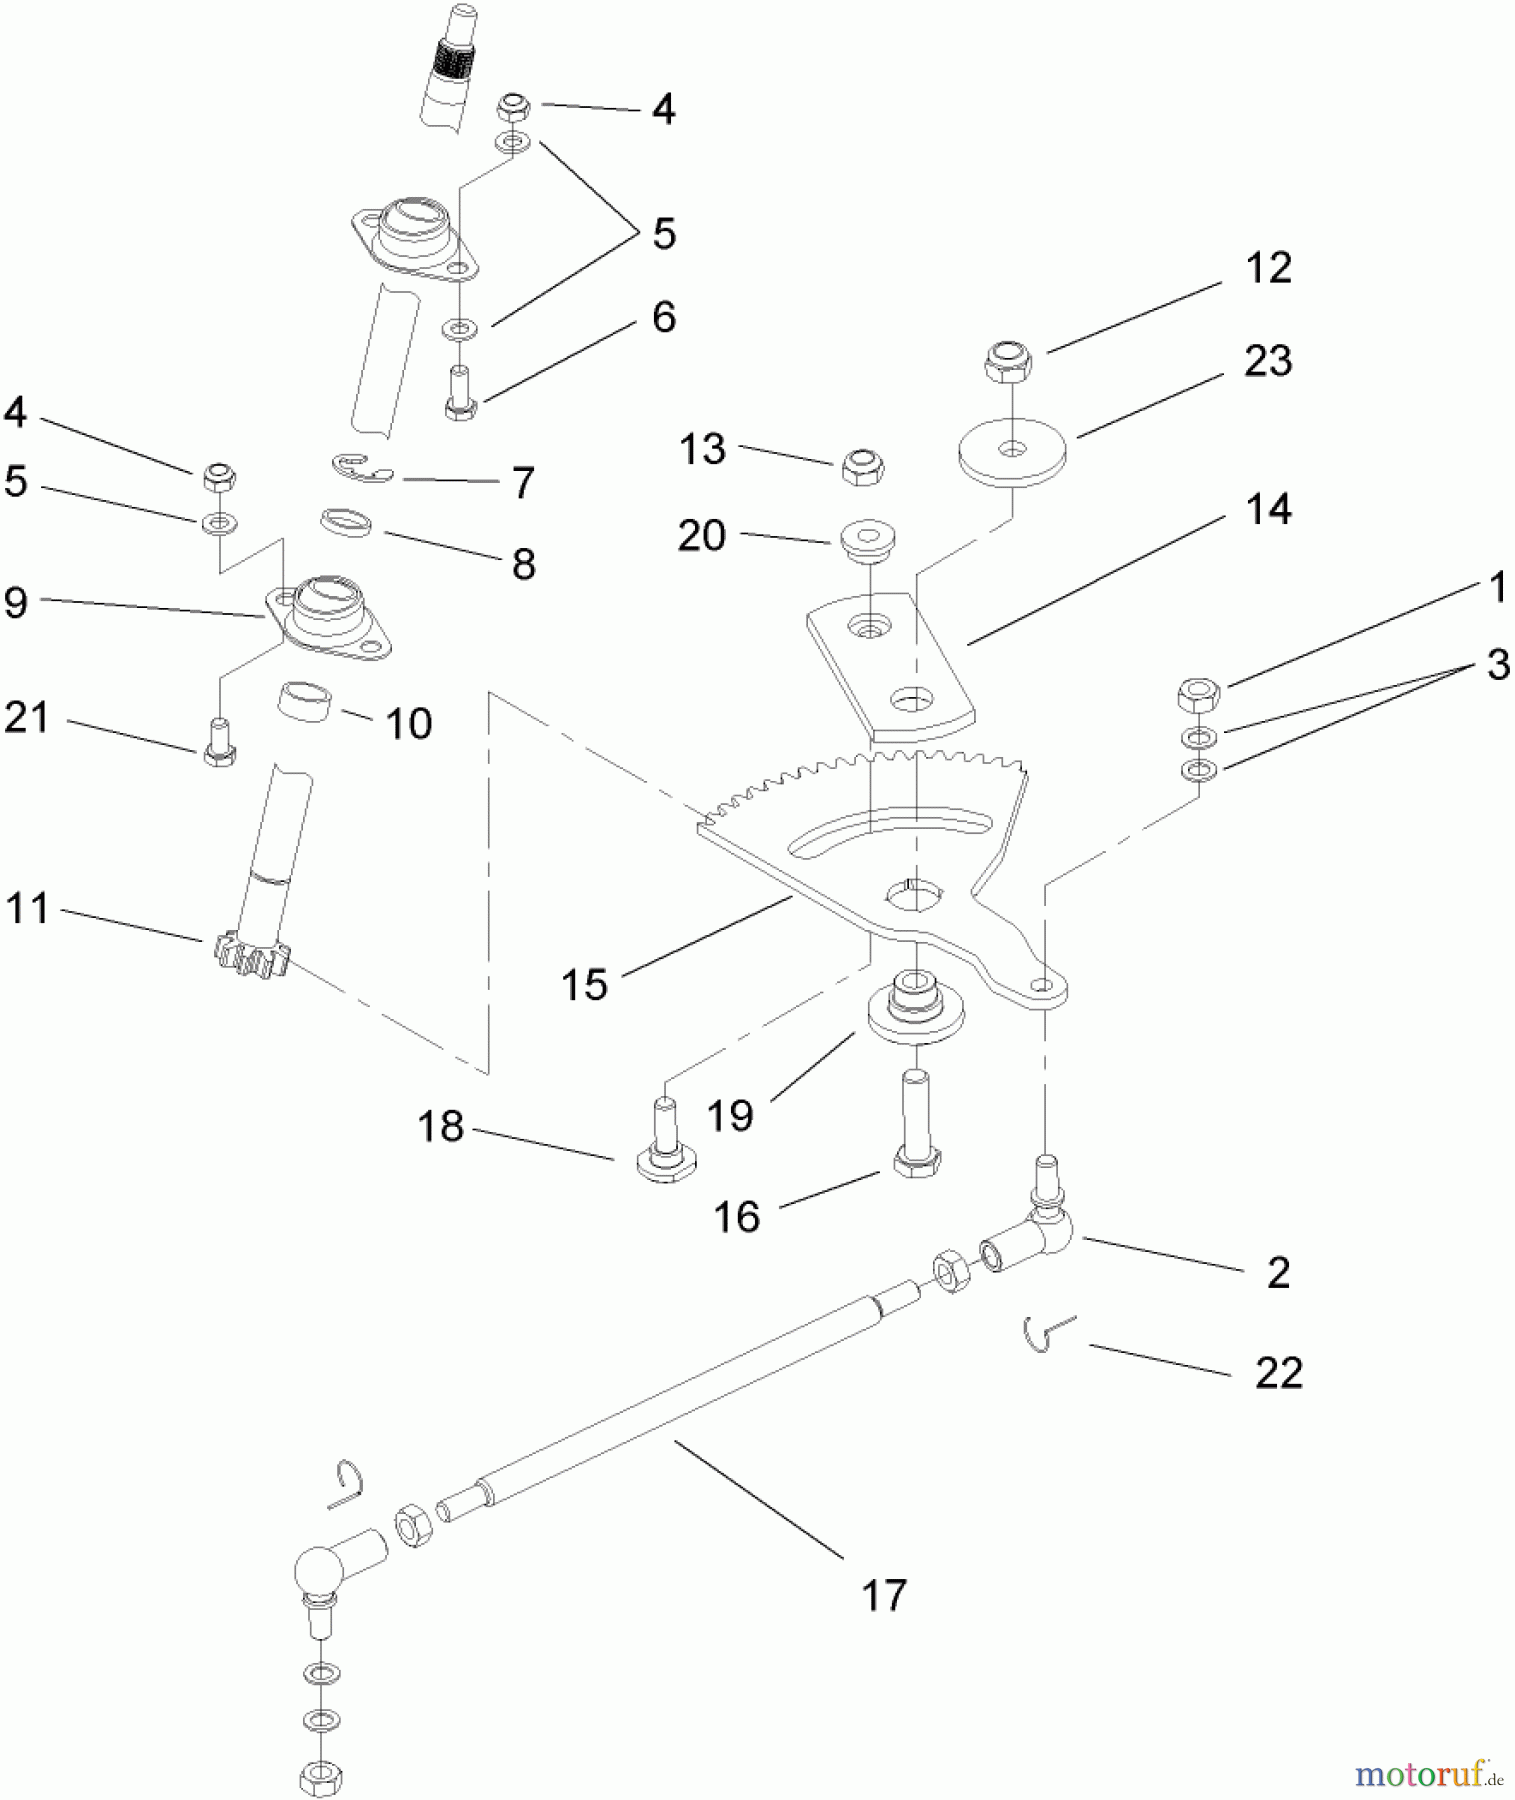  Toro Neu Mowers, Lawn & Garden Tractor Seite 1 74591 (DH 220) - Toro DH 220 Lawn Tractor, 2006 (260000001-260999999) STEERING ASSEMBLY